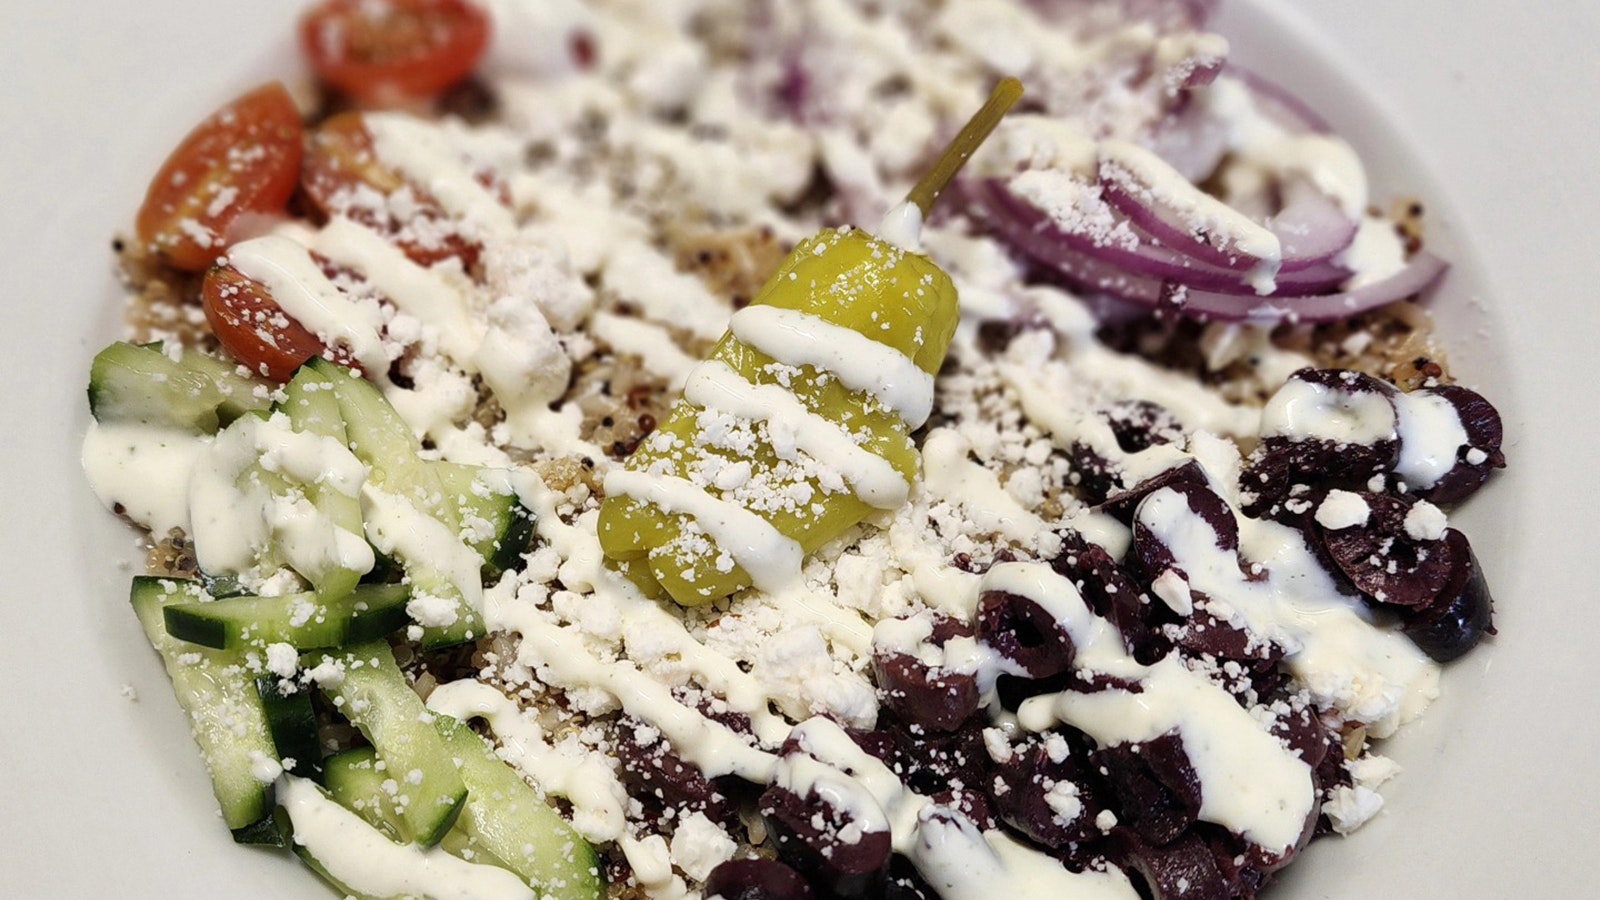 The grain bowl was recently added to the menu and has been offered in Greek and Southwest variations.